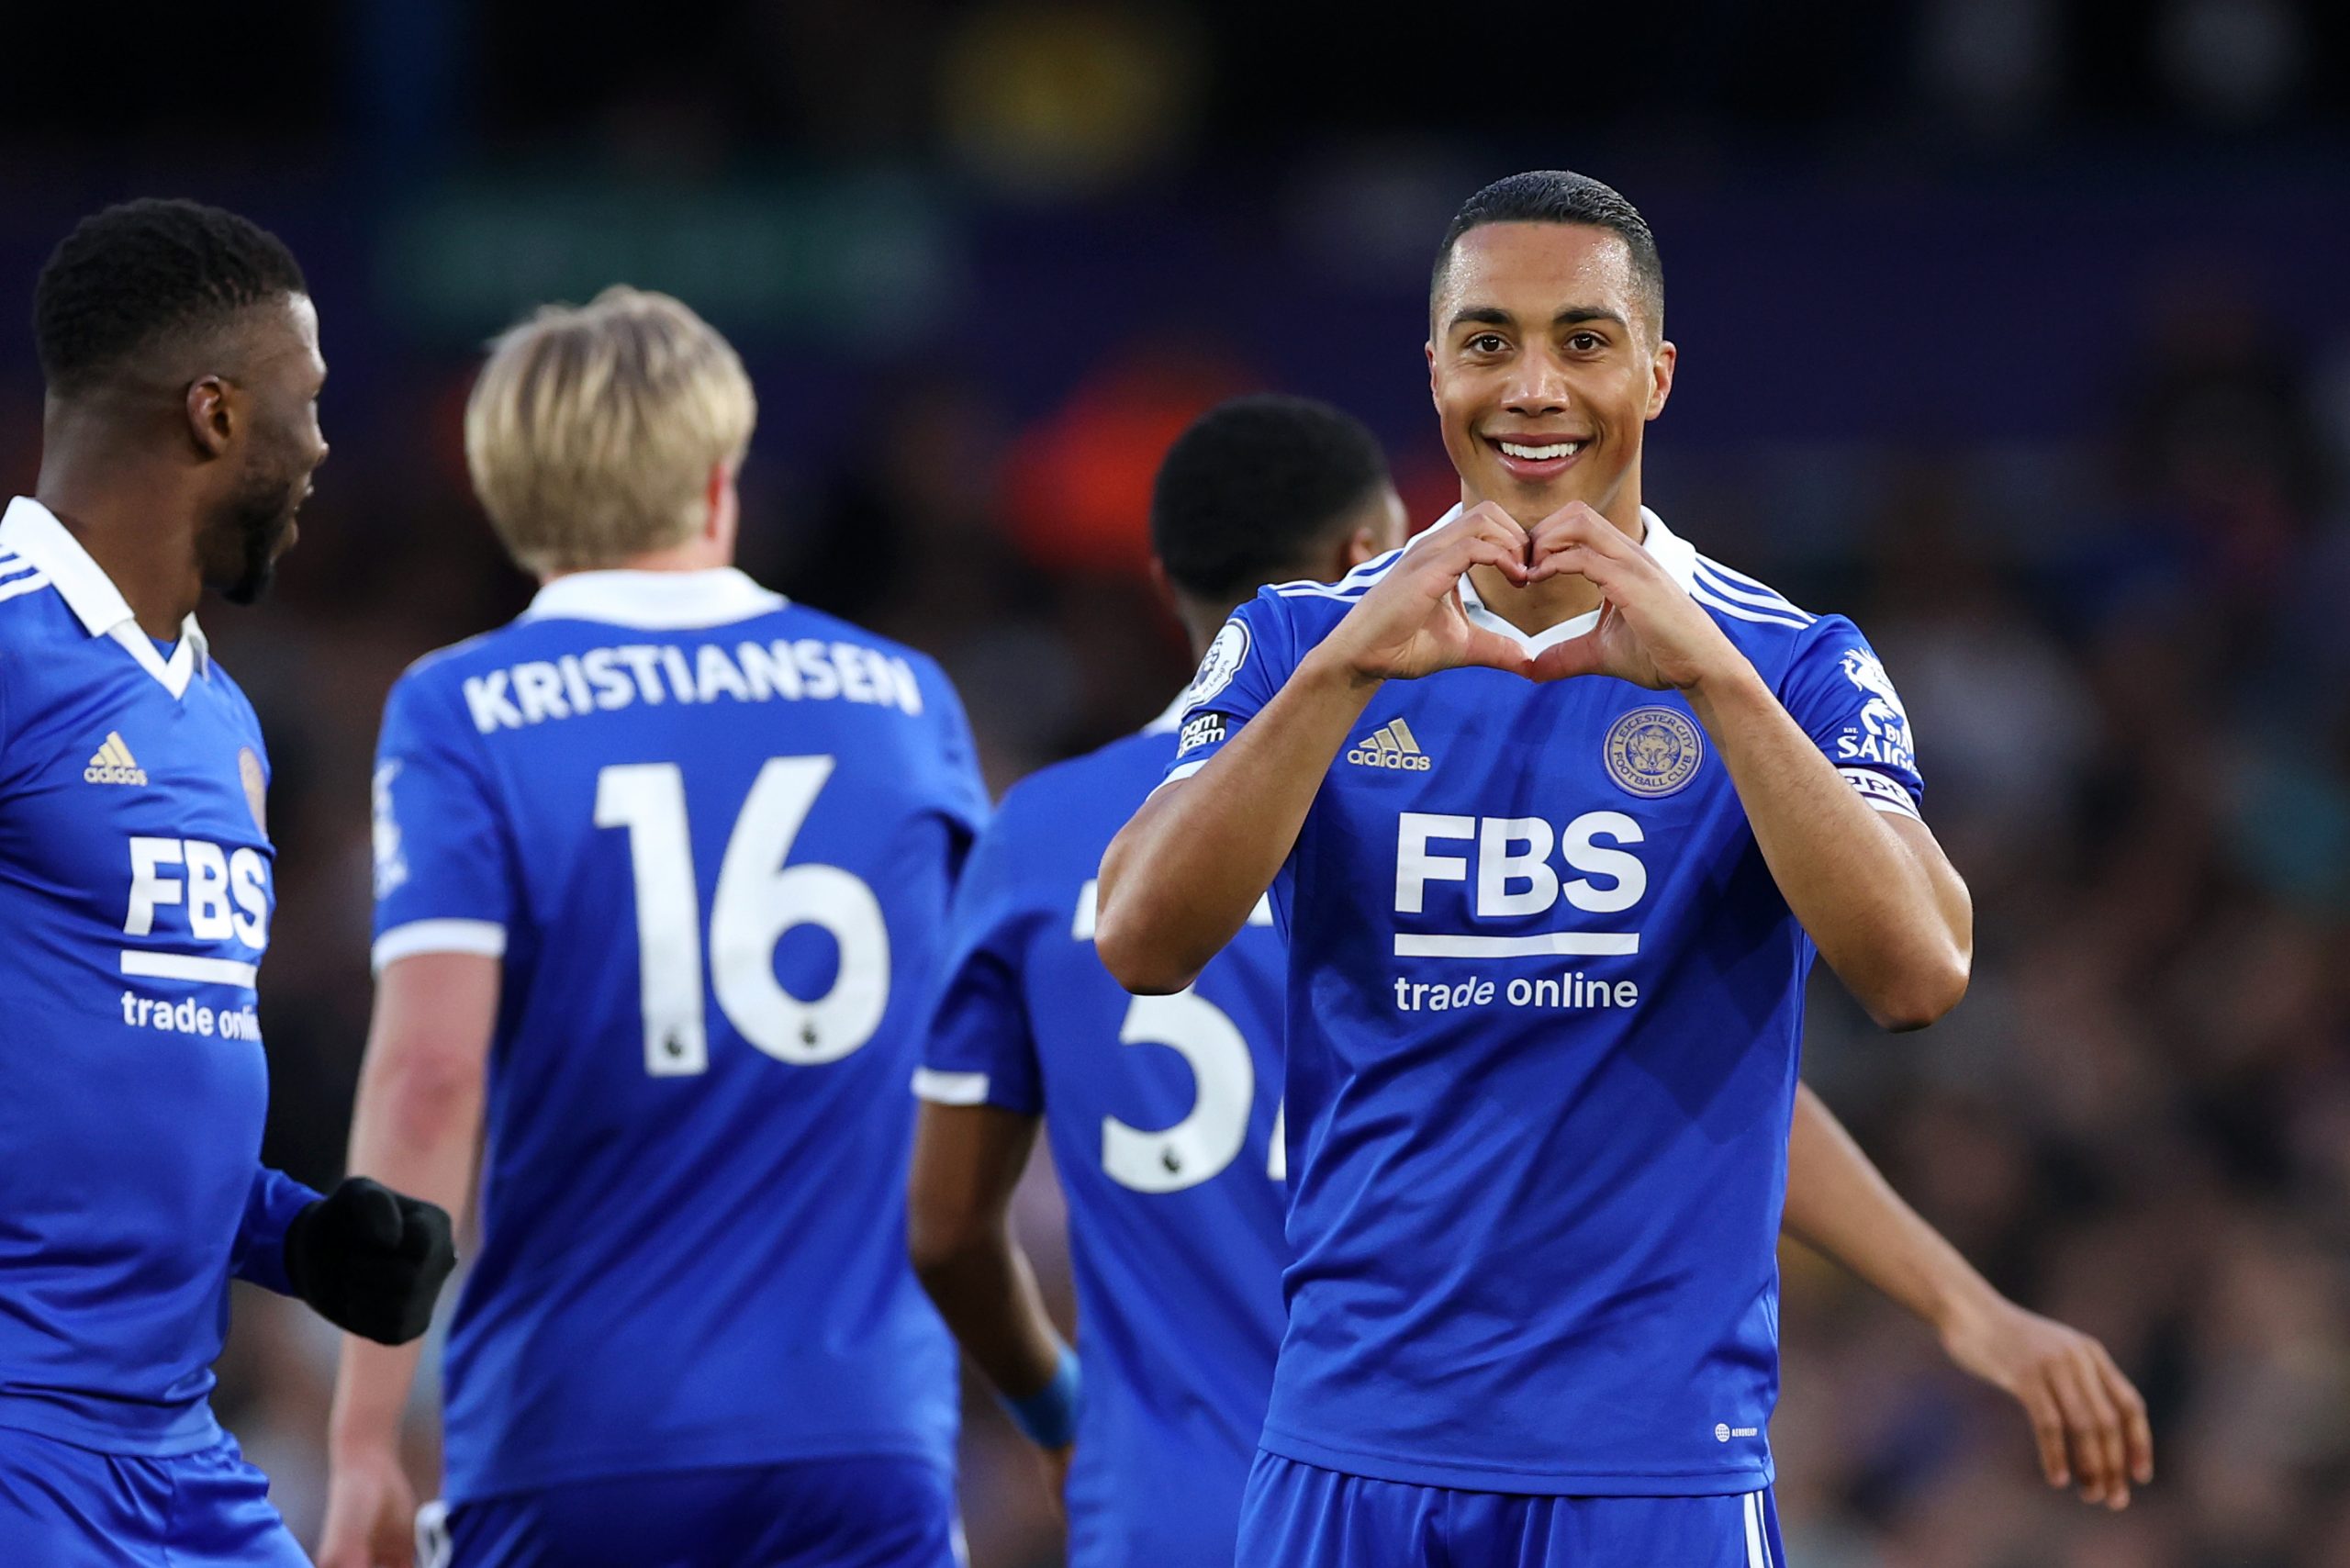 Juventus join Manchester United in race for Leicester City midfielder Youri Tielemans